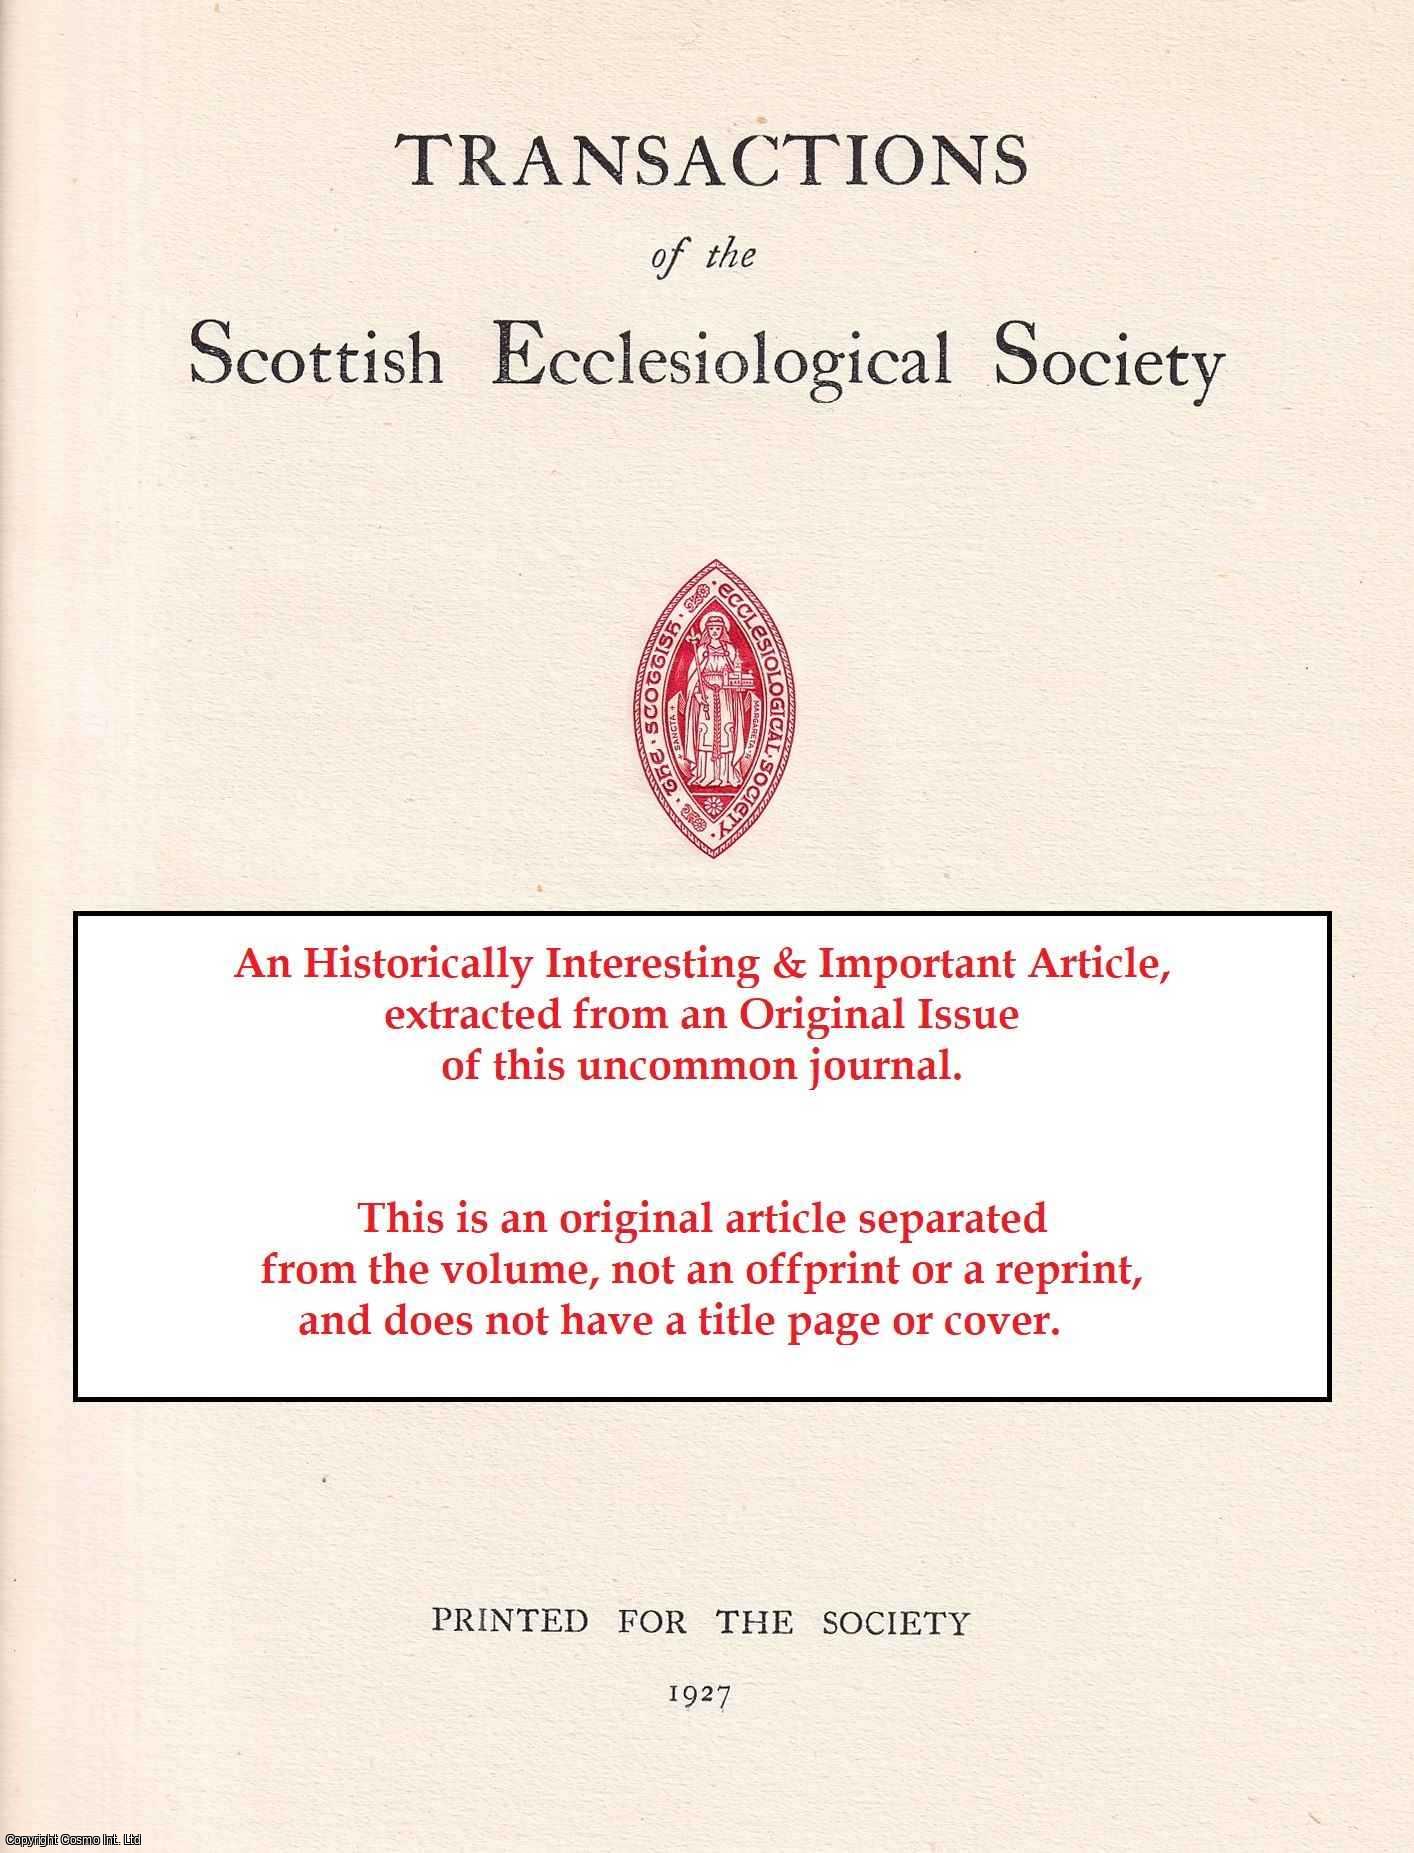 J.J. Vernon - The Ecclesiastical Place-Names of Roxburghshire. An original article from the Transactions of the Scottish Ecclesiological Society, 1909.